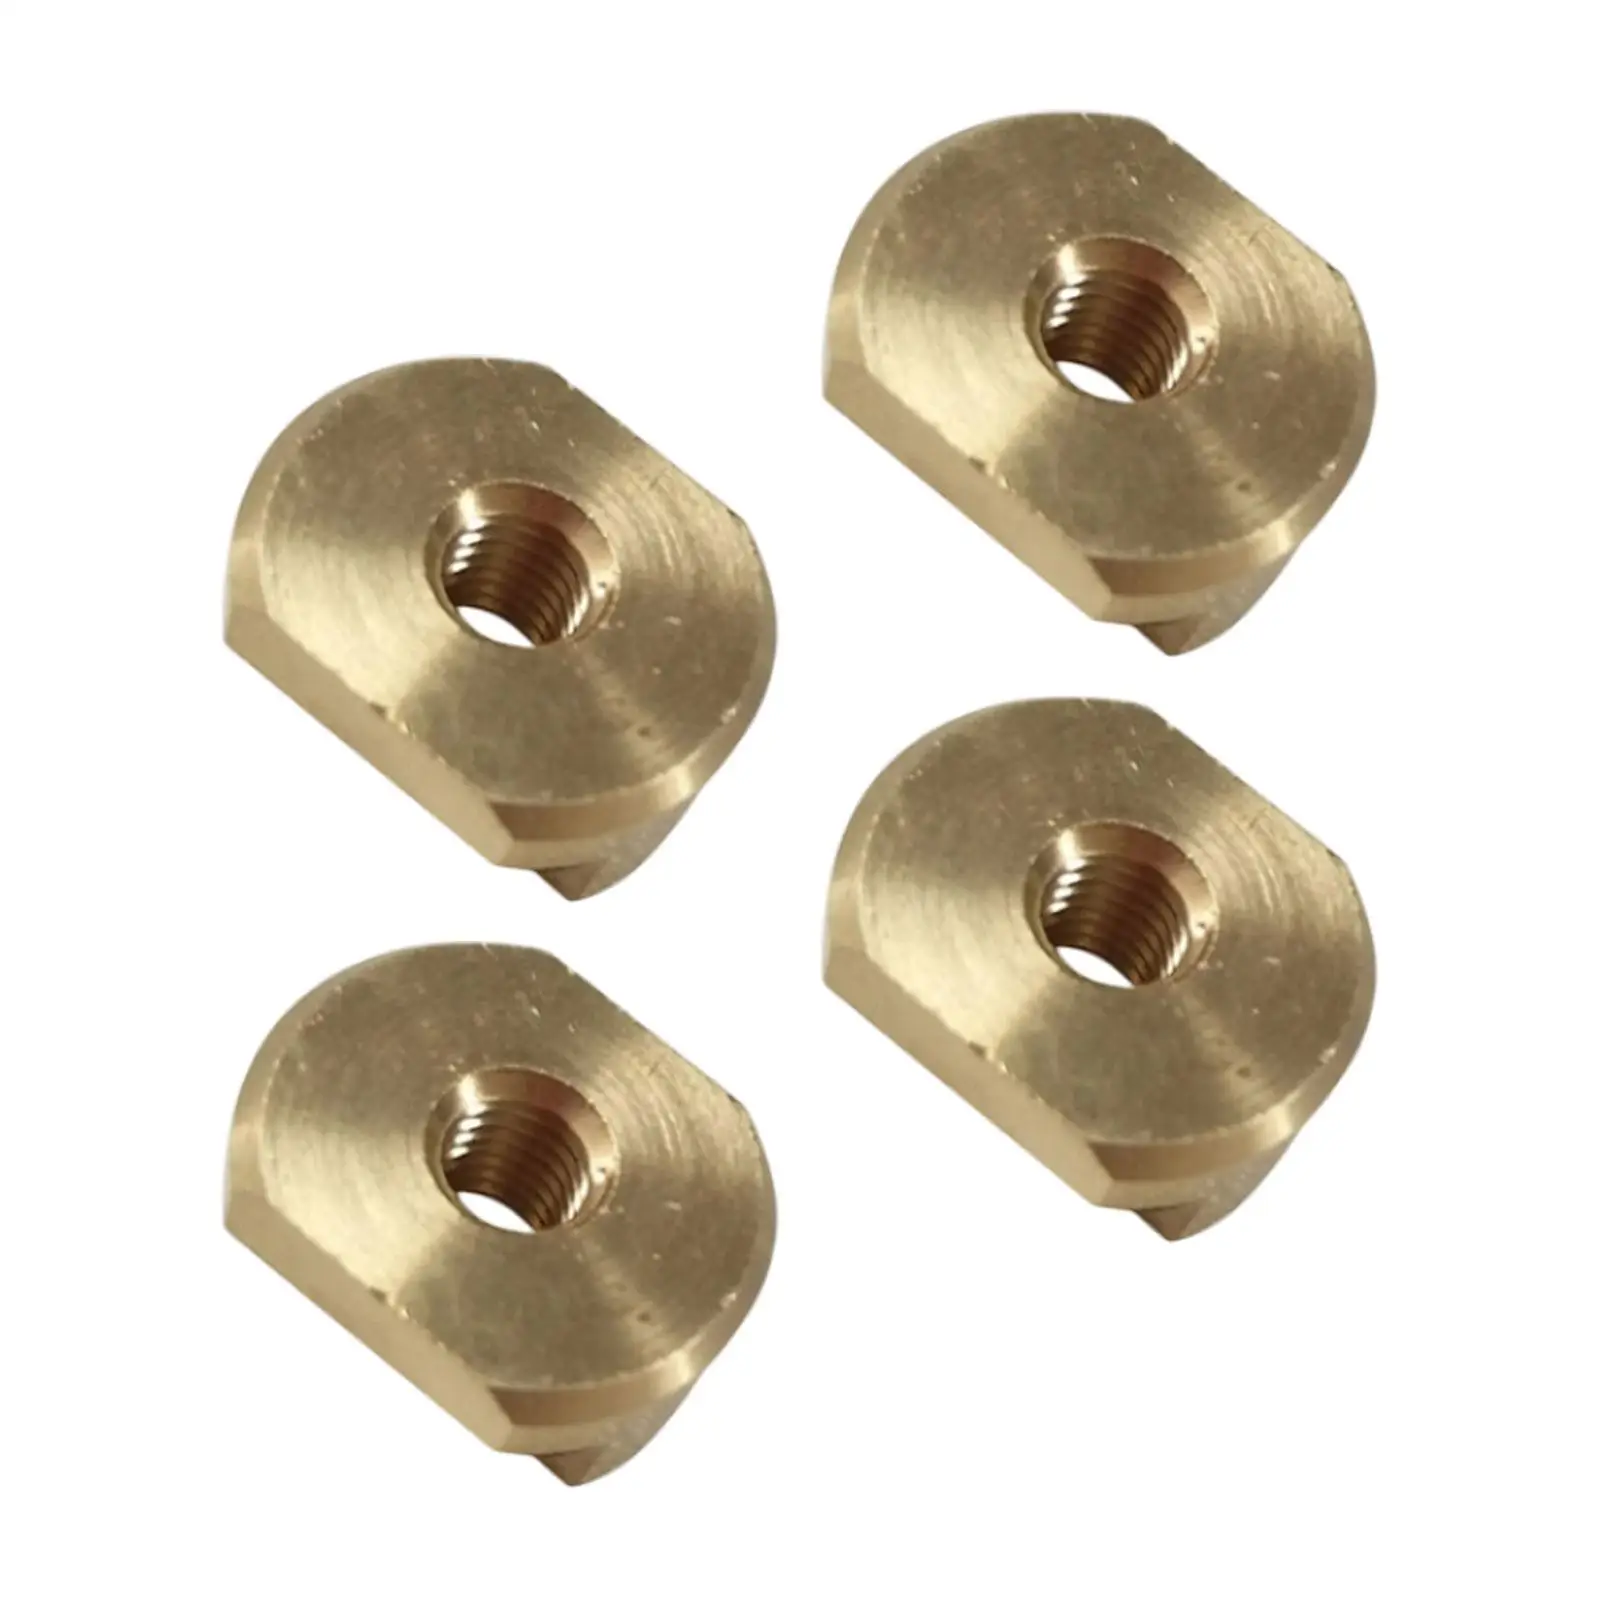 Hydrofoil Mounting T Nuts Brass for Hydrofoil Tracks Surfboard Fittings